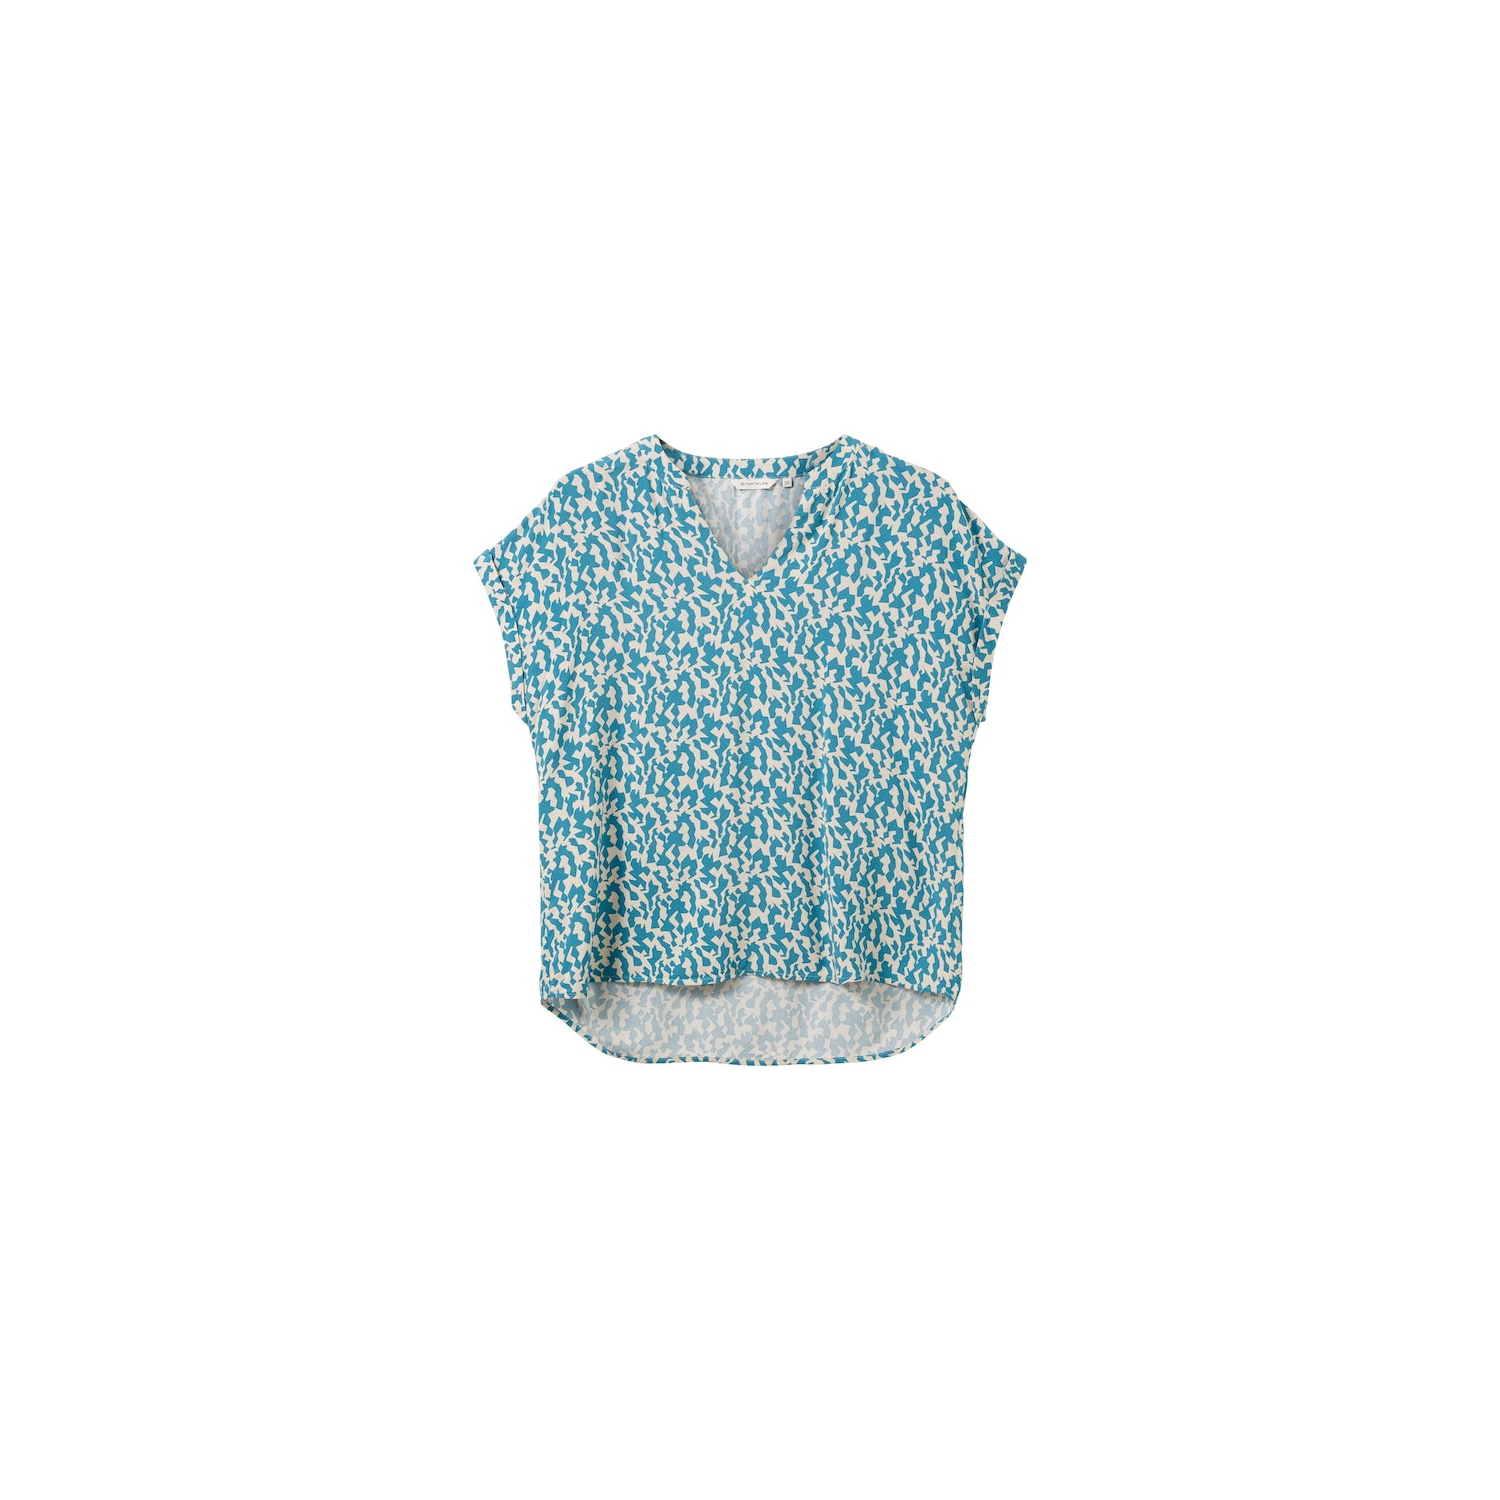 TAILOR Kurzarm-Bluse 25,00 € abstract petrol small design, TOM